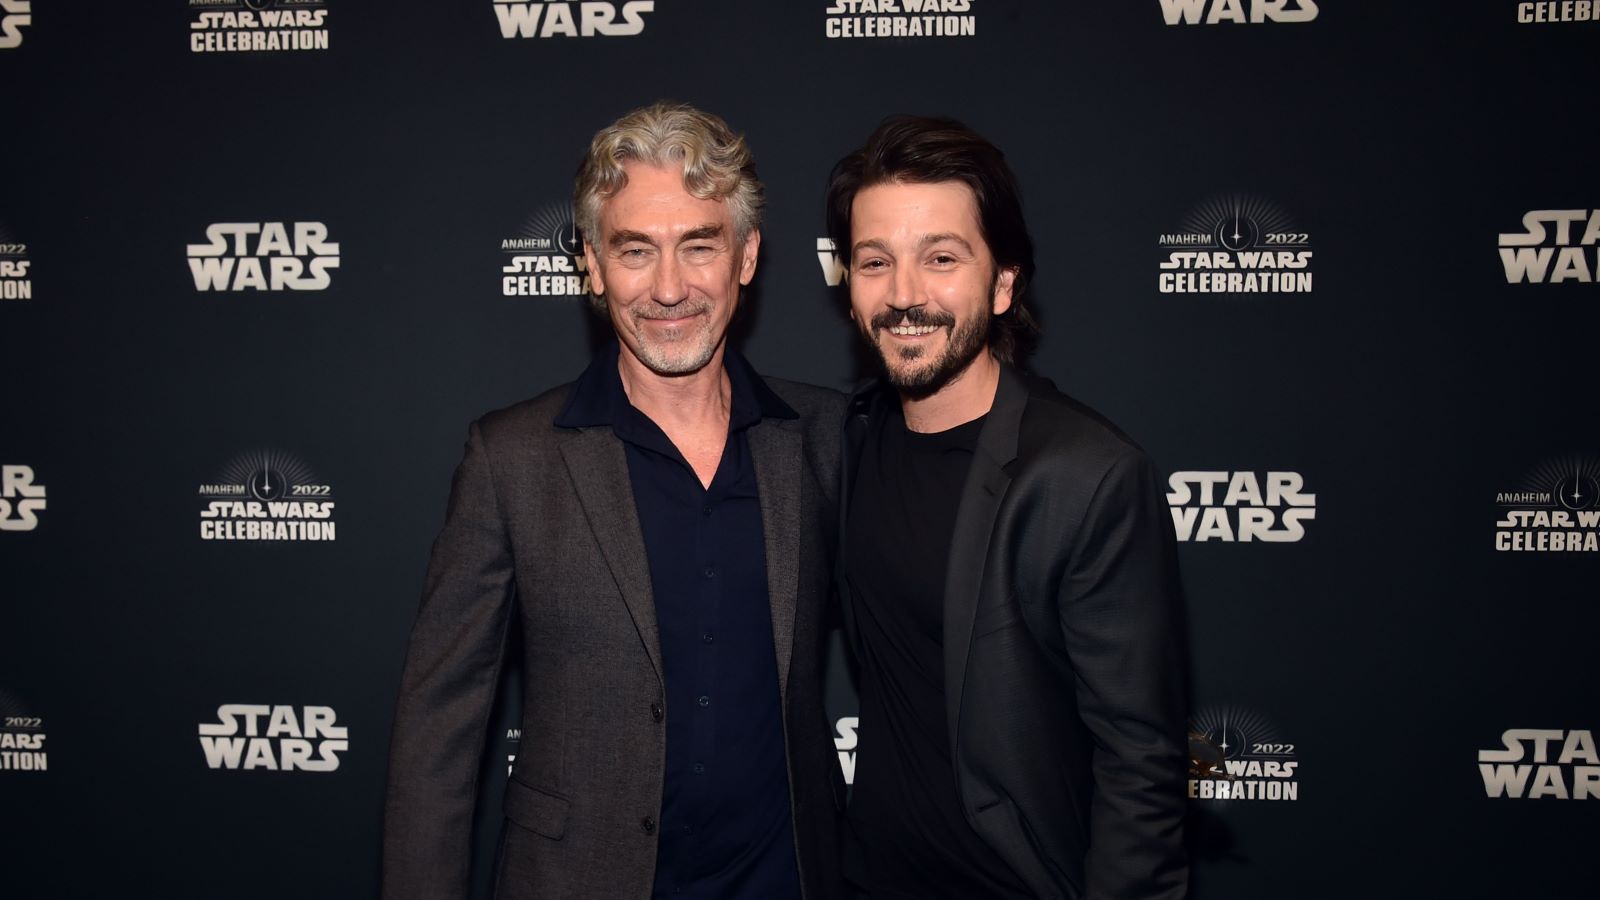 Tony Gilroy and Diego Luna attend the studio showcase panel at Star Wars Celebration for “Andor” in Anaheim, California on May 26, 2022. The new original series from Lucasfilm launches exclusively on Disney+ August 31. (Photo by Alberto E. Rodriguez/Getty Images for Disney)